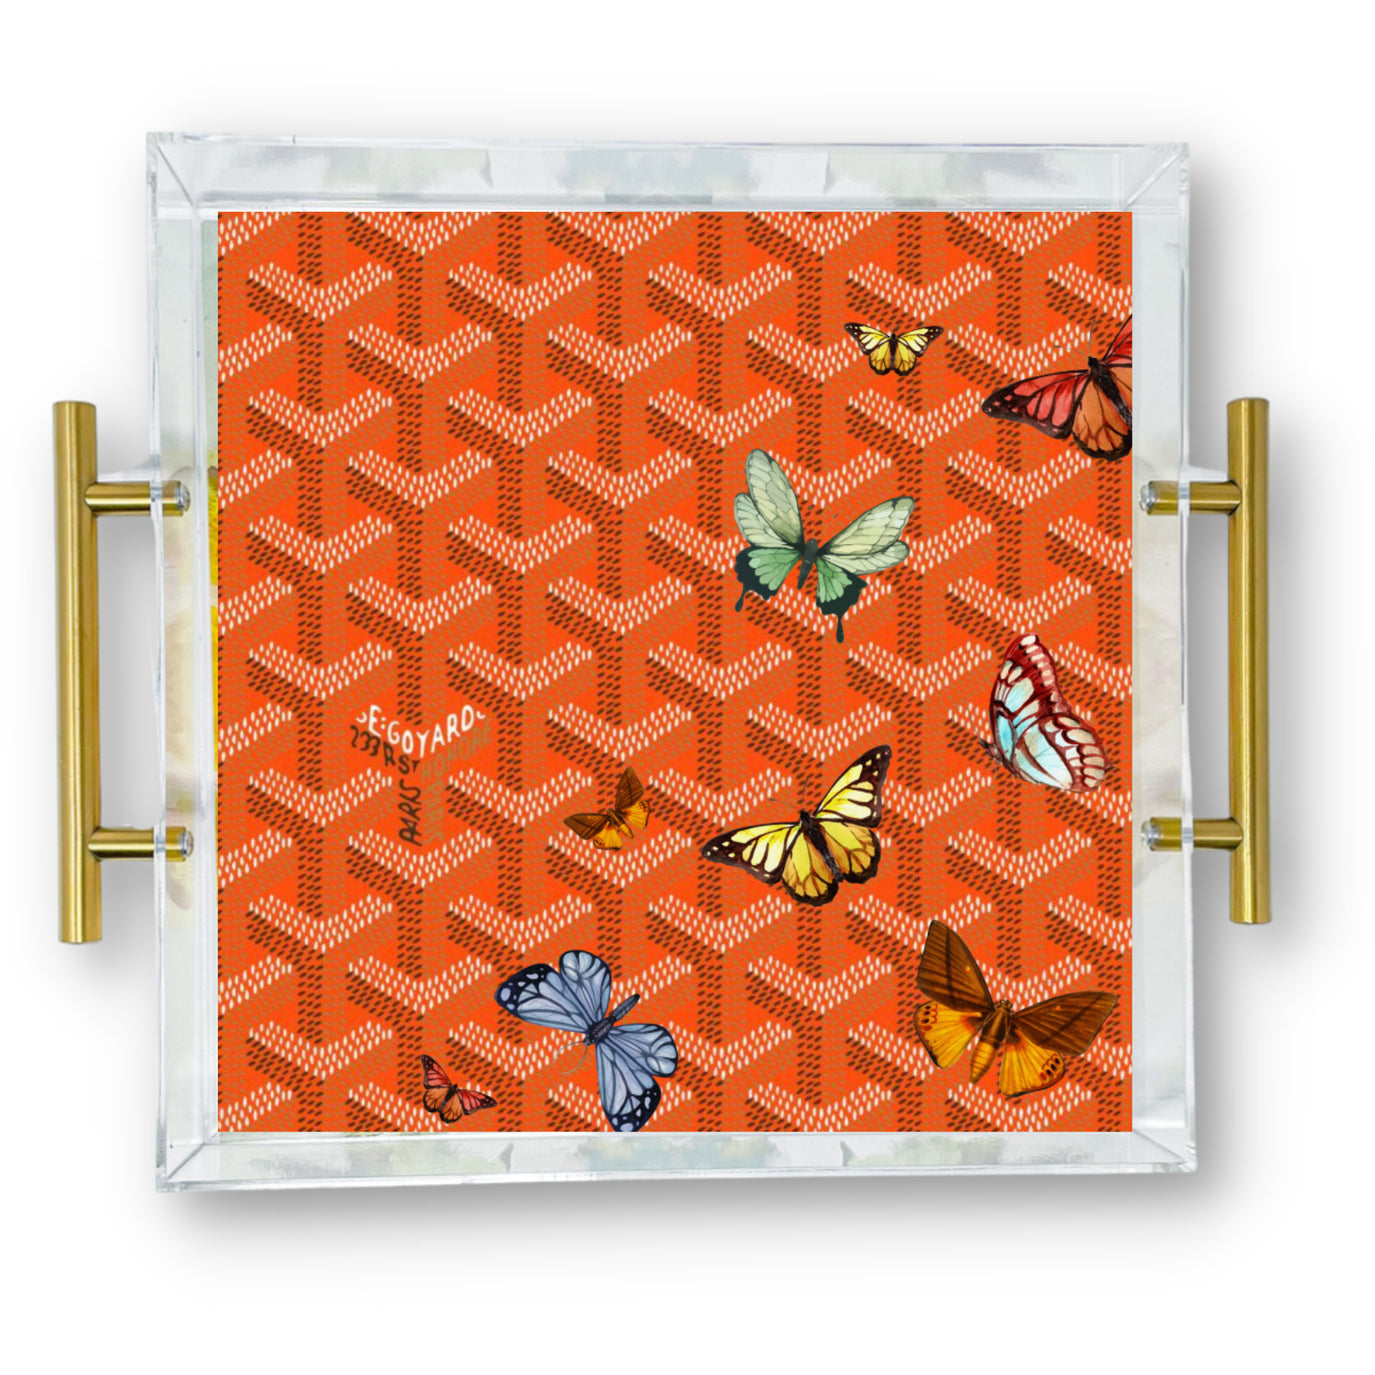 Fly Girl Large Tray - Tart By Taylor